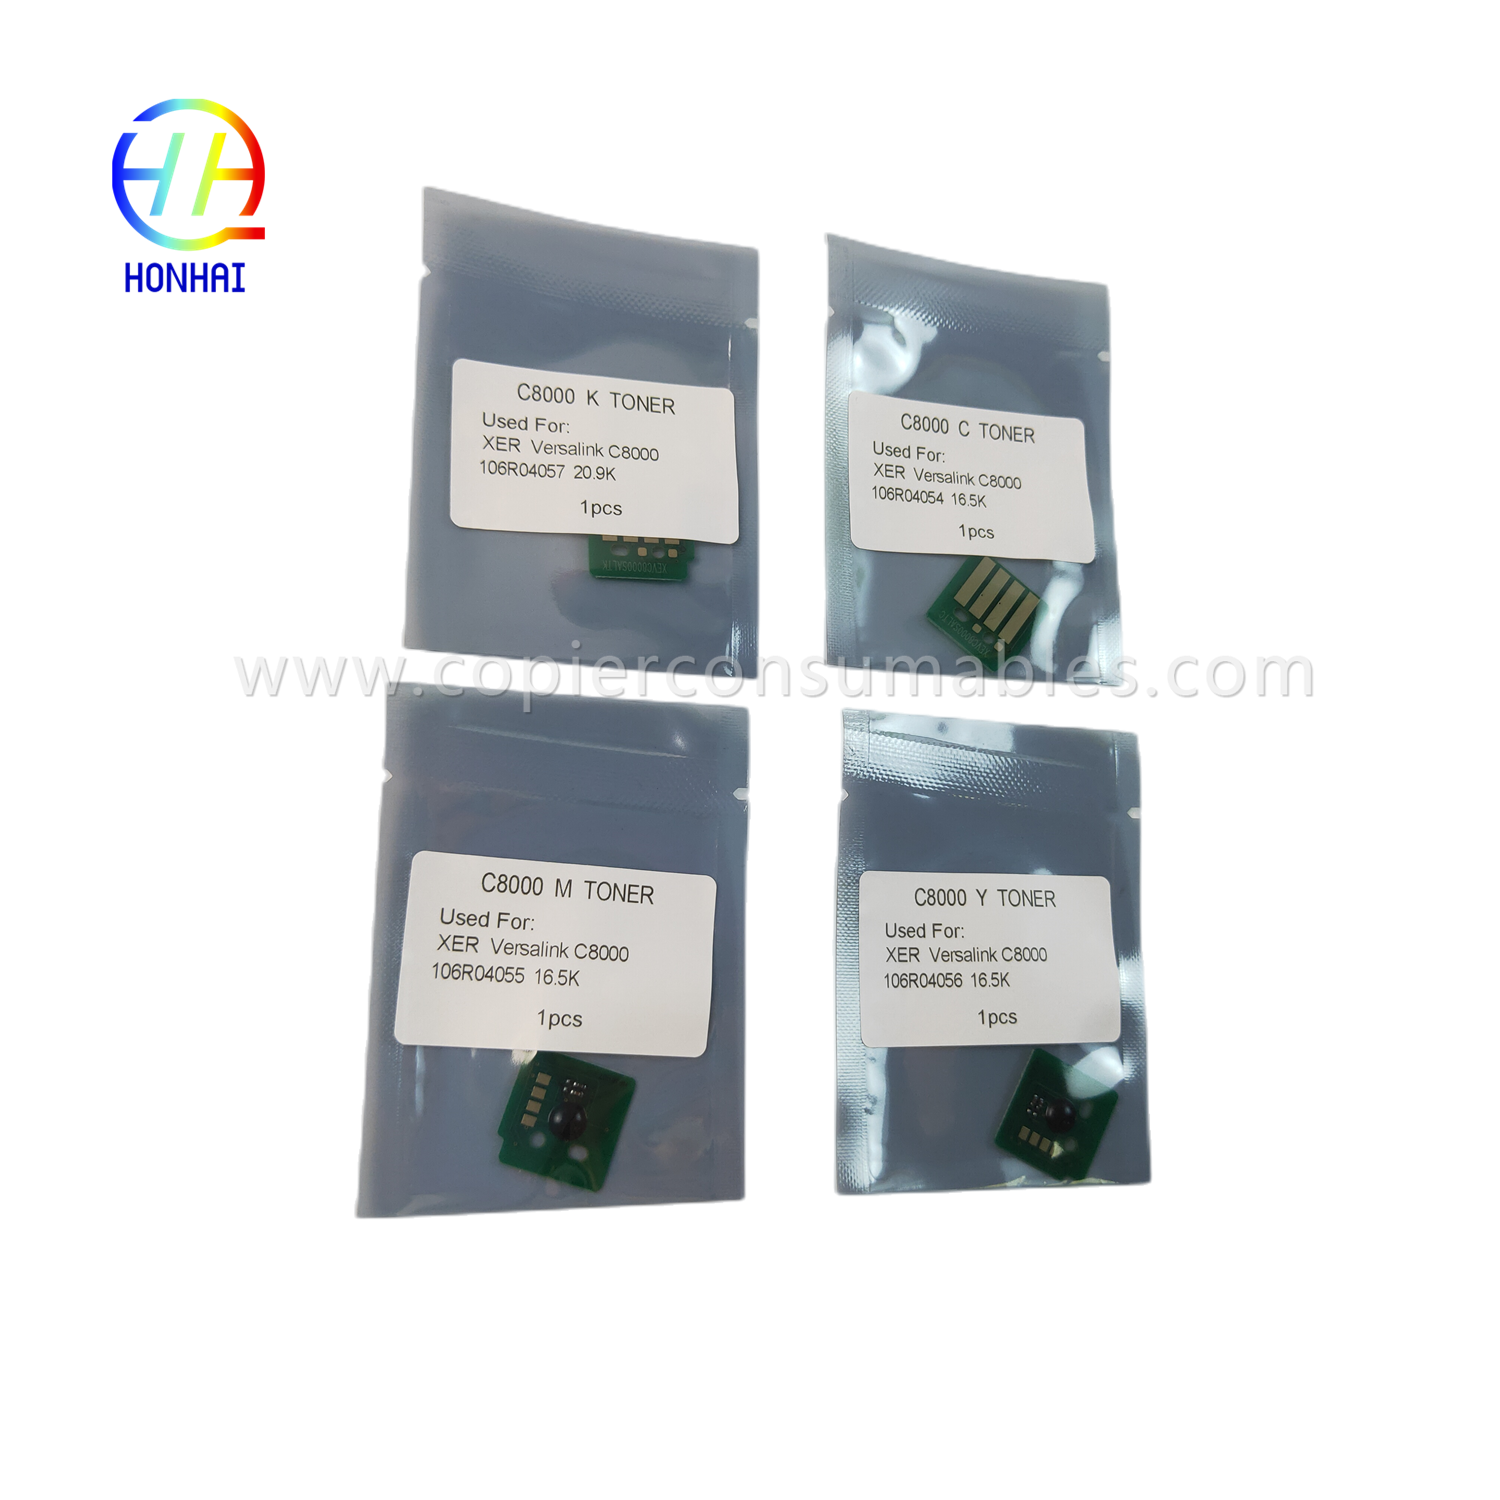 Toner Cartridge Chip for Xerox VersaLink C8000 C8000W C 8000 8000W 106R04057 106R04054 106R04055 106R04056 Color Printer Chips (4)_副本